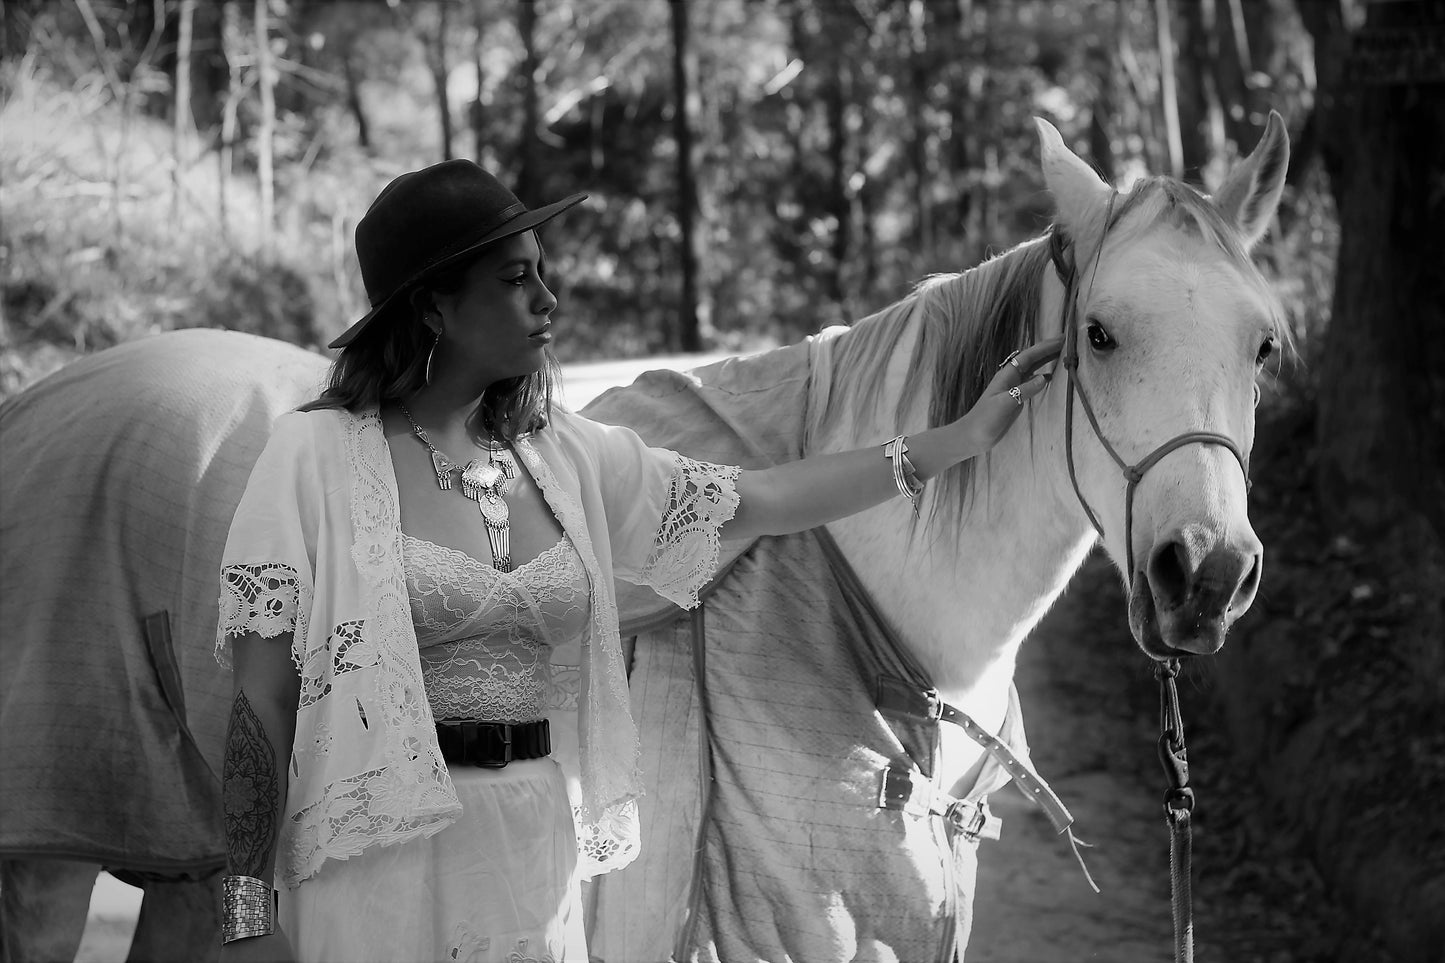 Boho image of woman with horse and jewellery, vintage jacket